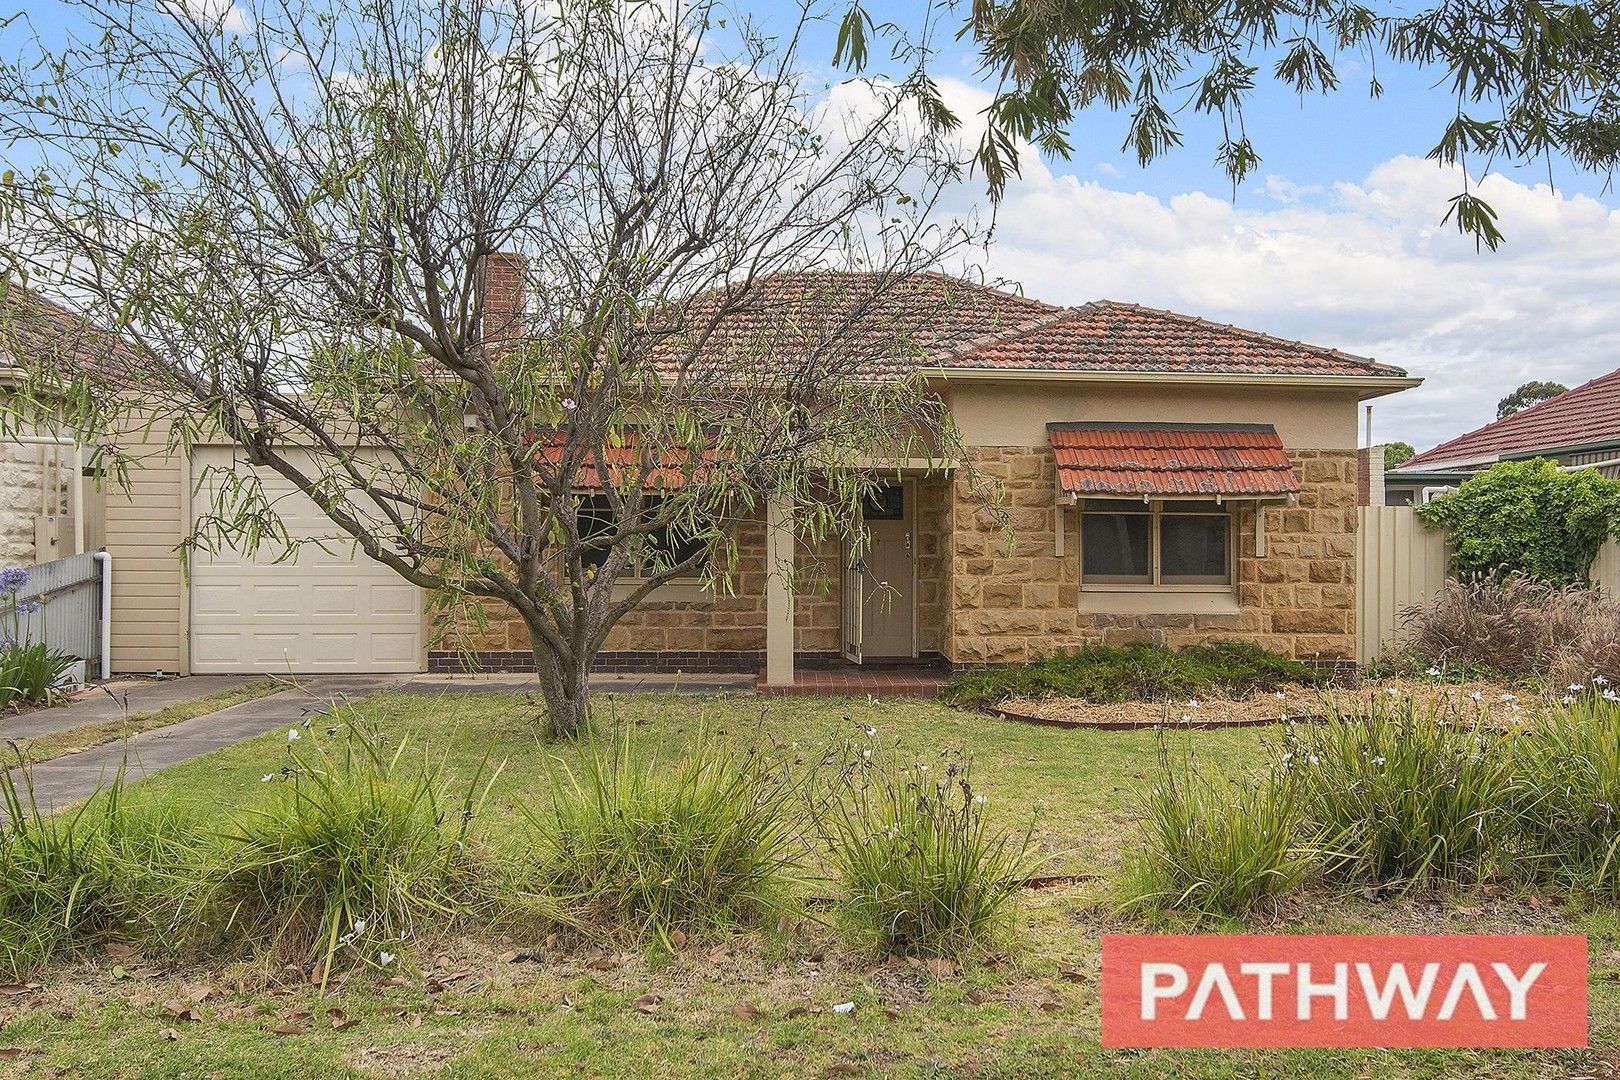 2 bedrooms House in 8 Griffiths Road PLYMPTON PARK SA, 5038